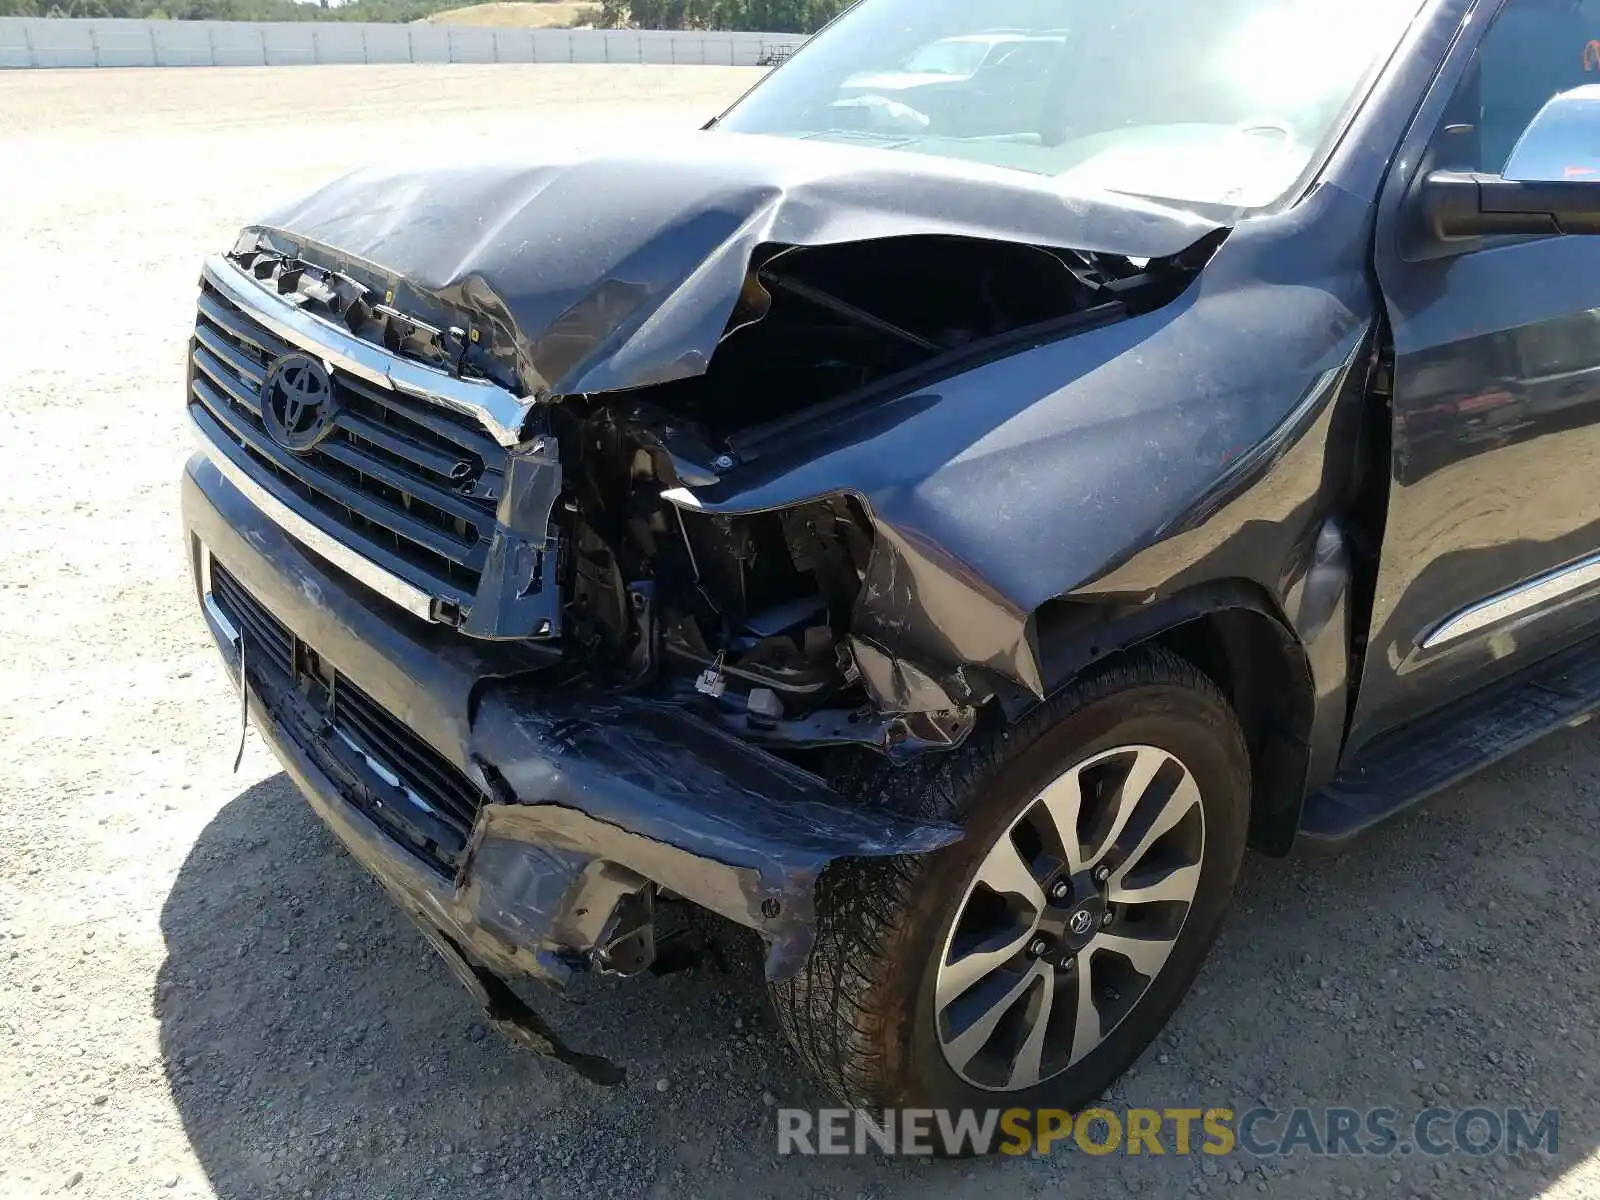 9 Photograph of a damaged car 5TDJY5G11KS165869 TOYOTA SEQUOIA 2019